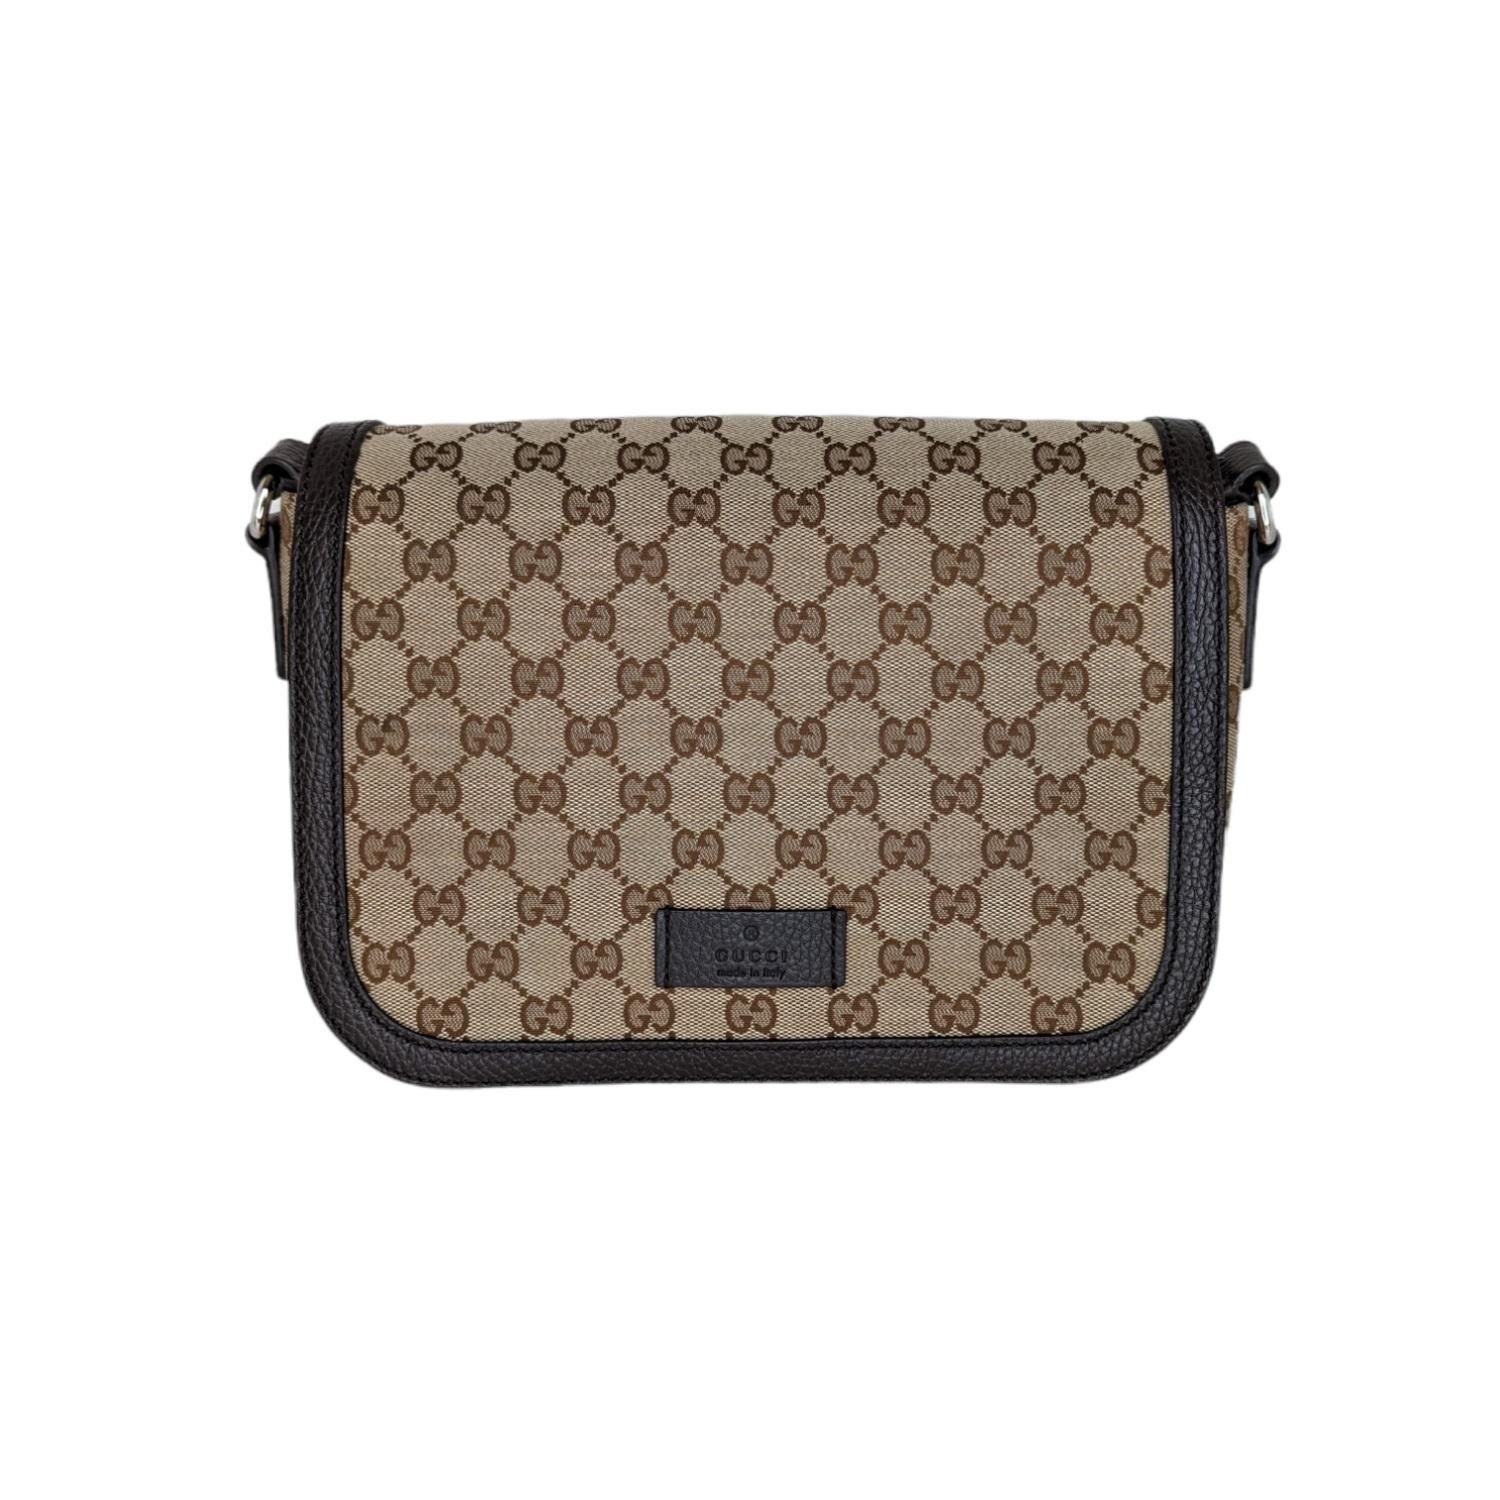 This stylish messenger bag is crafted of classic dark brown on beige Gucci GG monogram canvas. The bag features a complementary chocolate brown leather trim and an adjustable fabric body strap with silver-tone hardware. The flap opens to a chocolate